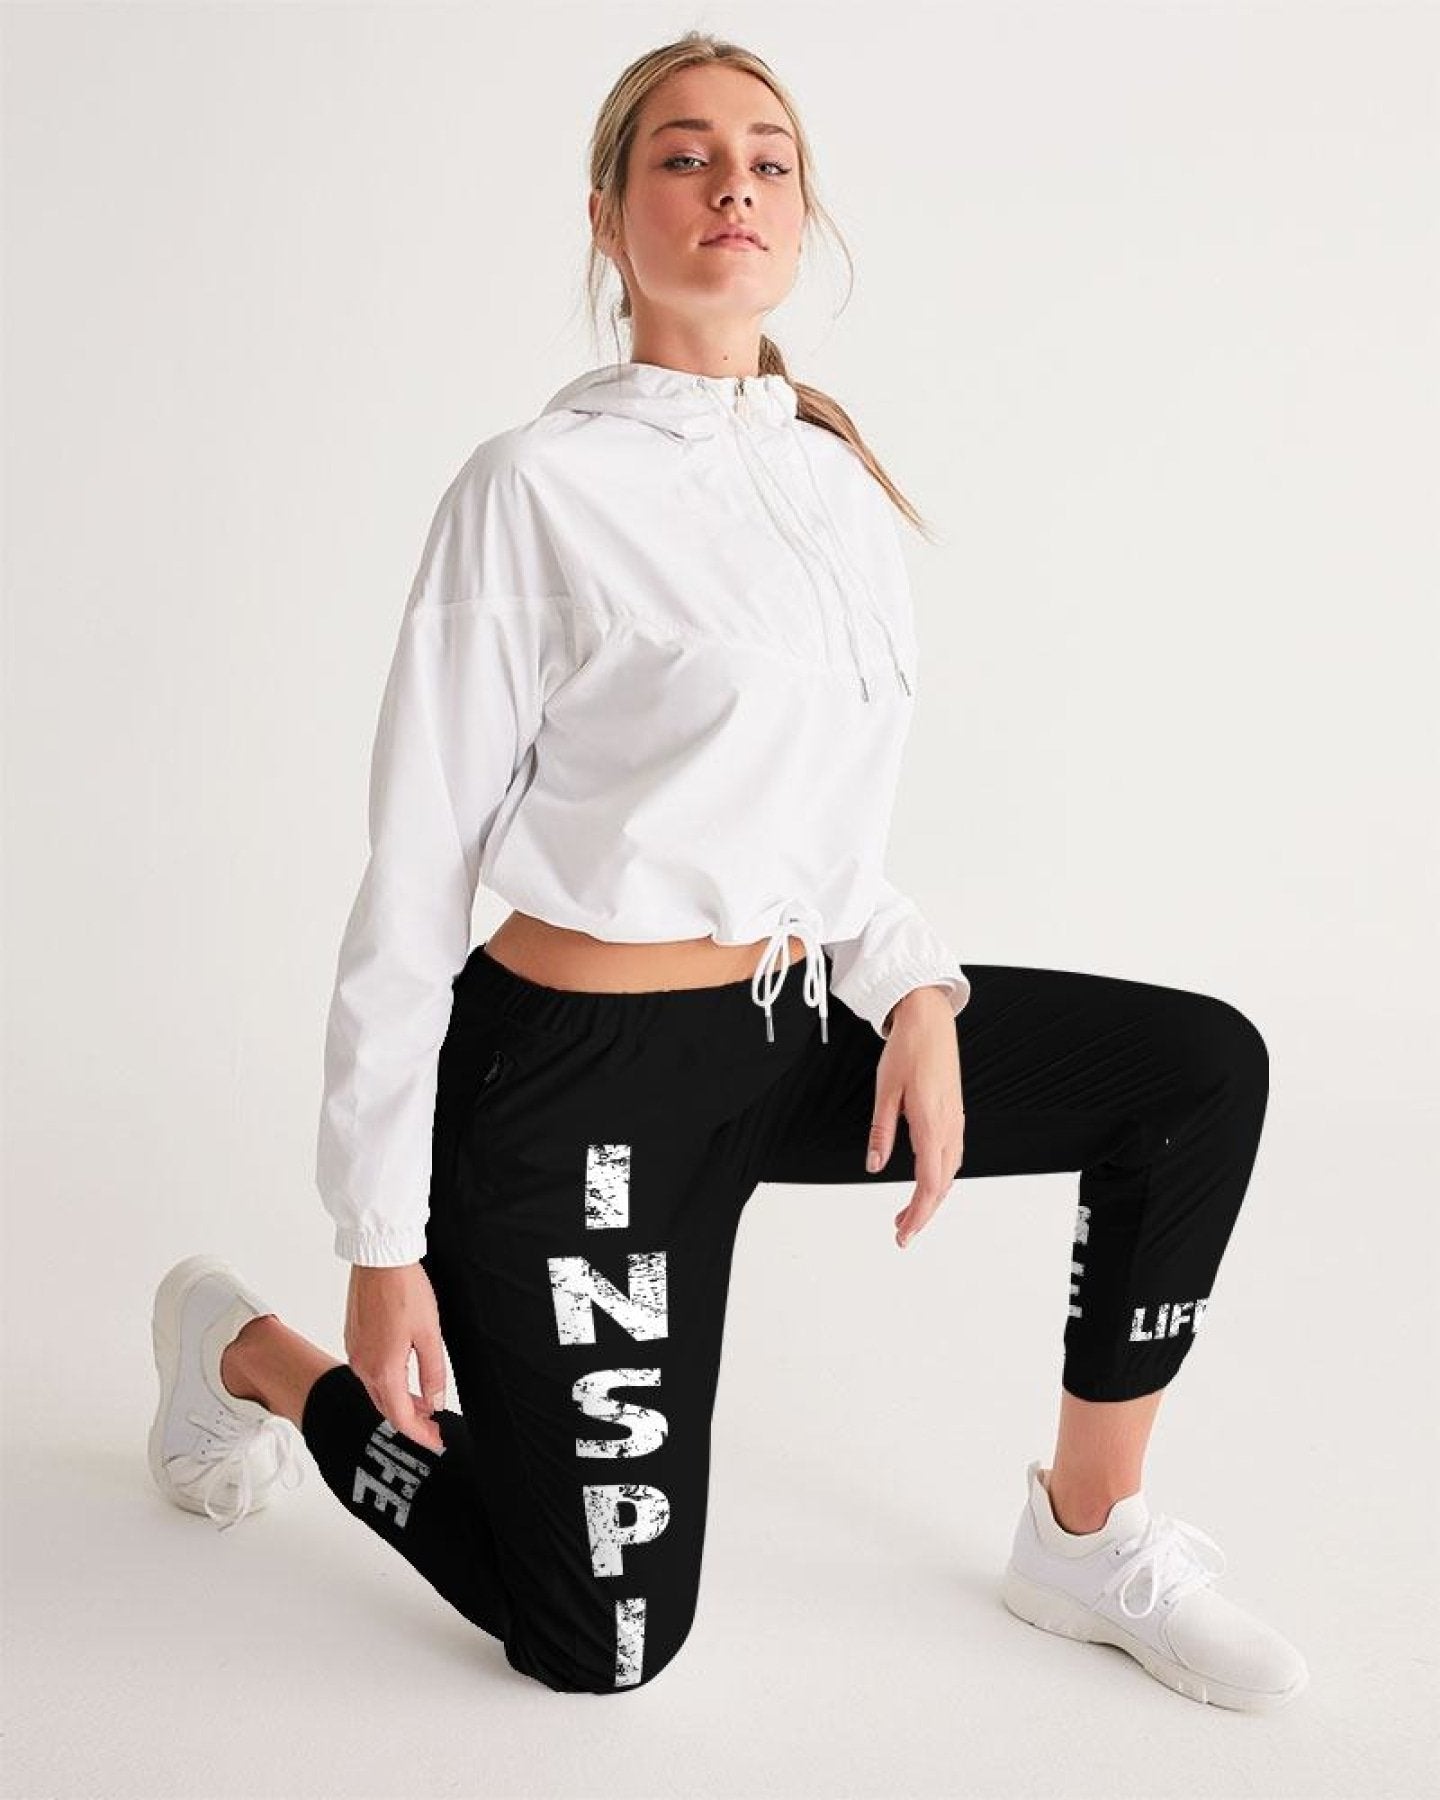 Elevate your active wardrobe with our stylish Liz Track Pants for women. Discover comfort and performance in our women's track pants designed to keep you moving.